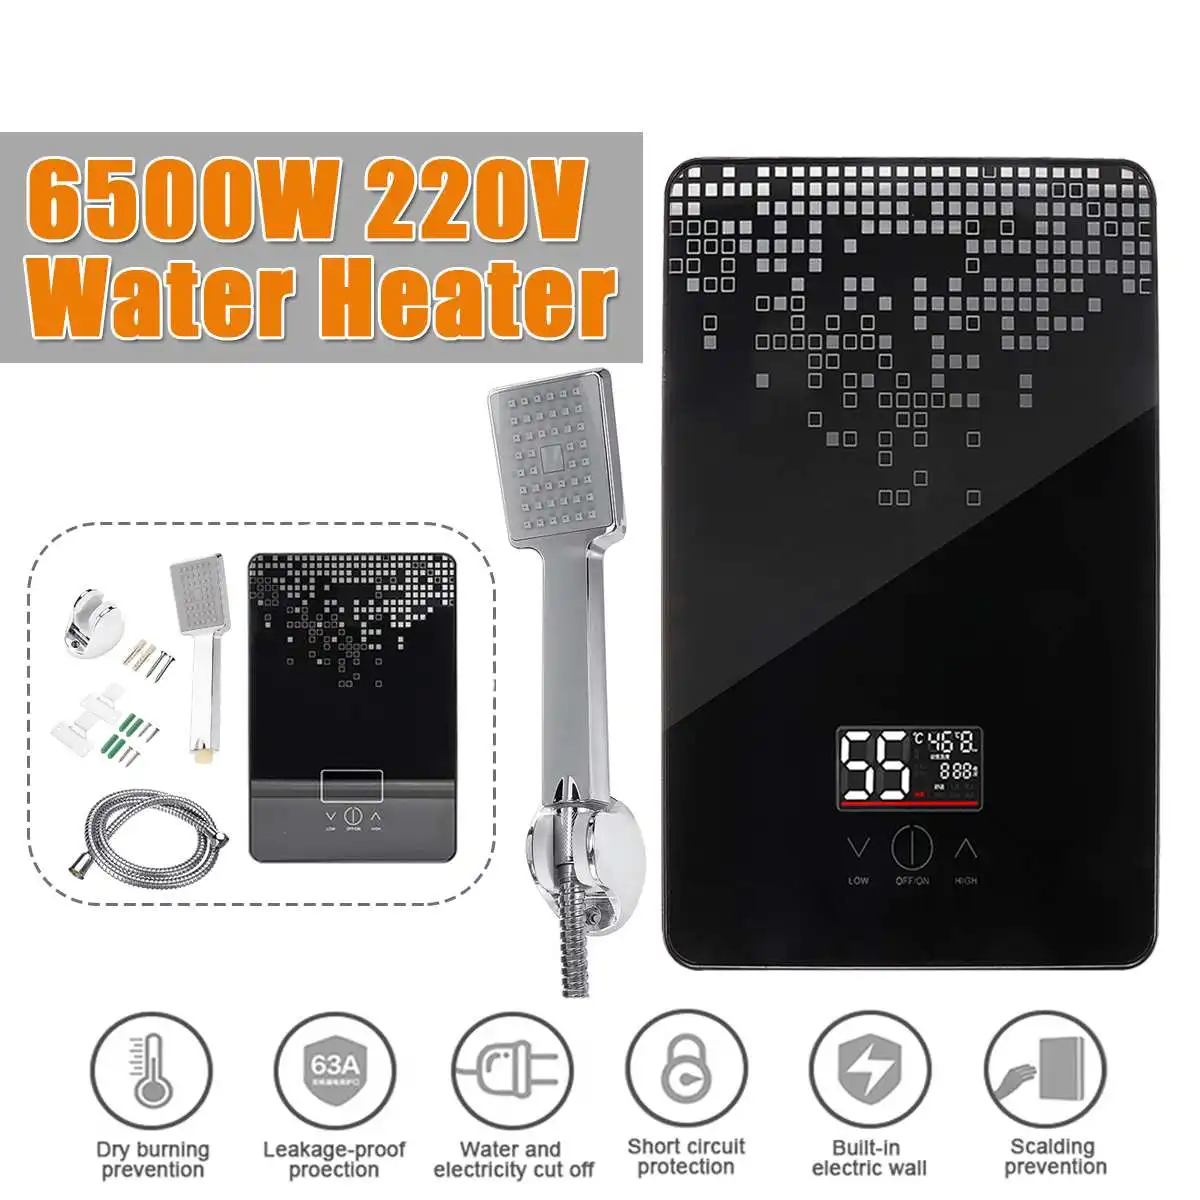 220V 6500W Electric Water Heater Instant Tankless Water Heater Bathroom Shower Multi-purpose Household Hot-Water Heater 3